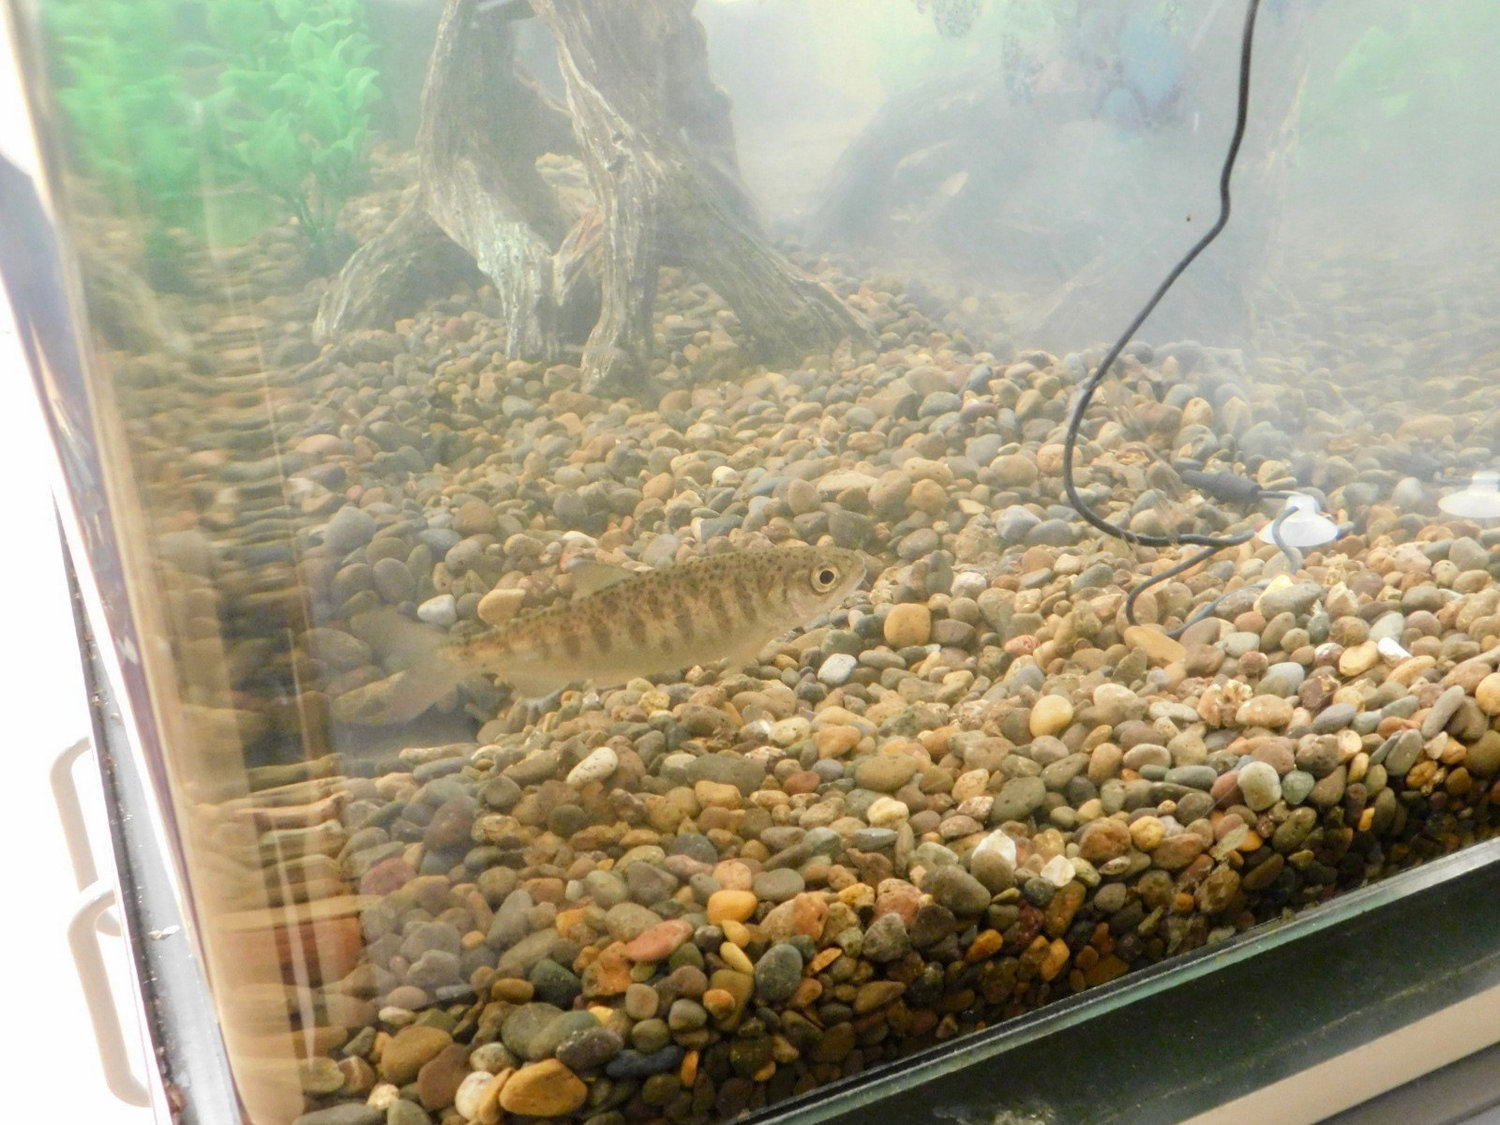 A young salmon is pictured inside one of the "Salmon in the Classroom" tanks at Union Ridge Elementary School in Ridgefield prior to being released.